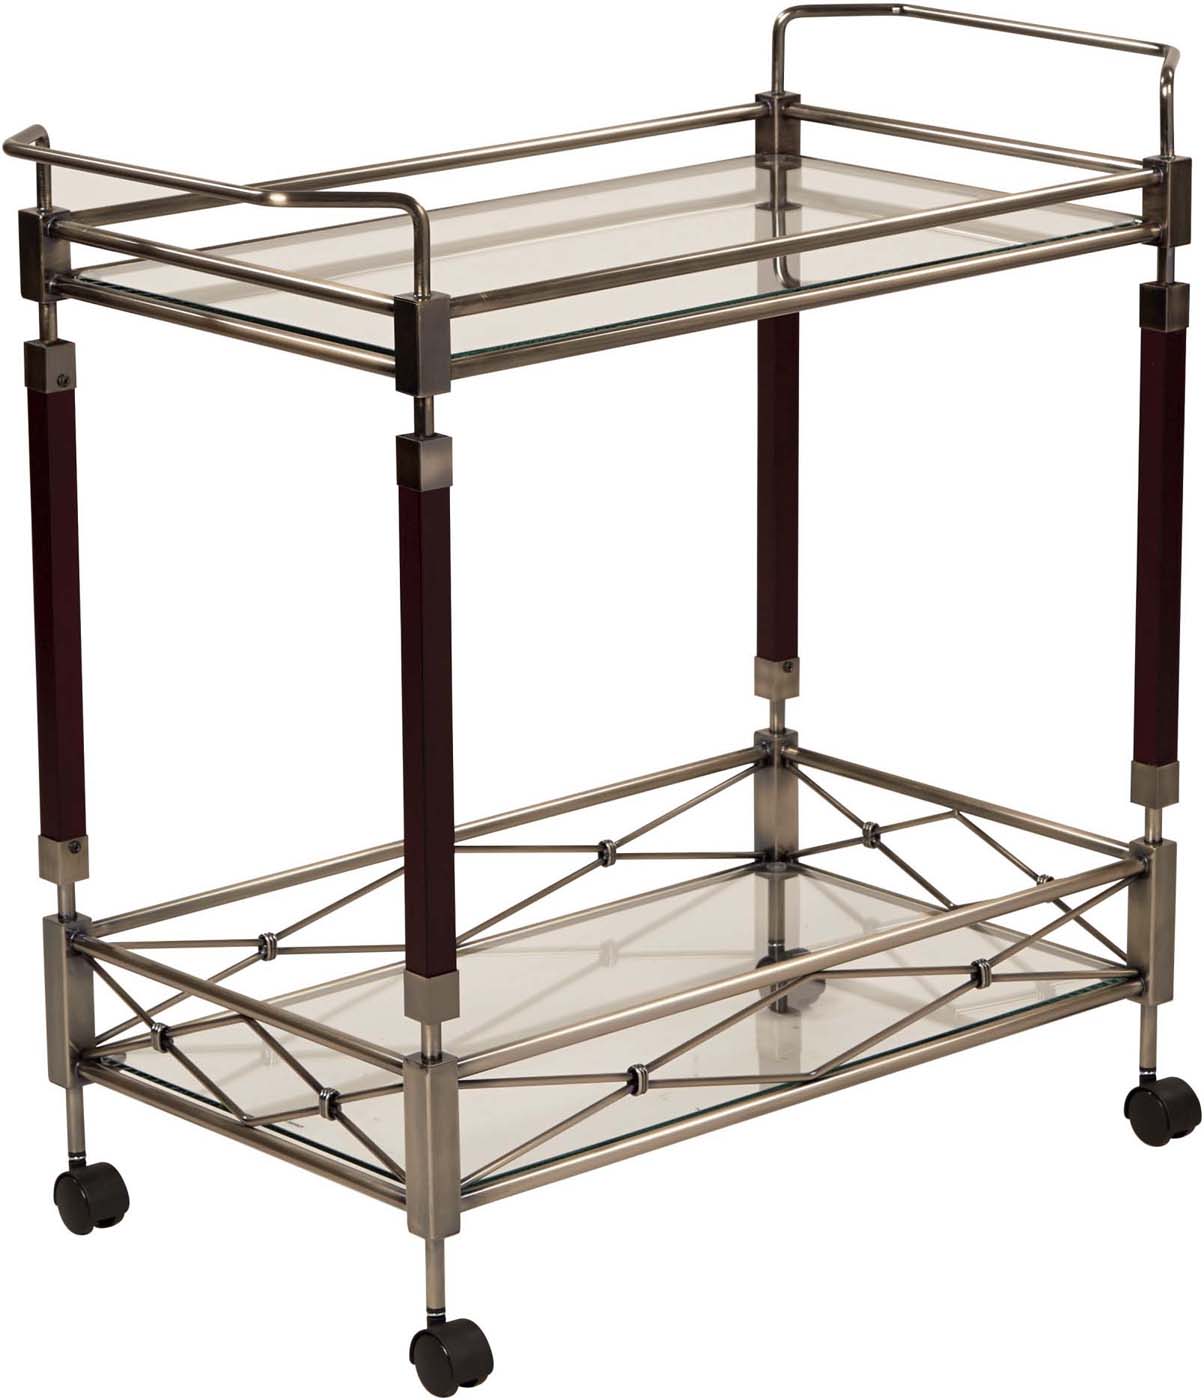 Serving Carts & Trays